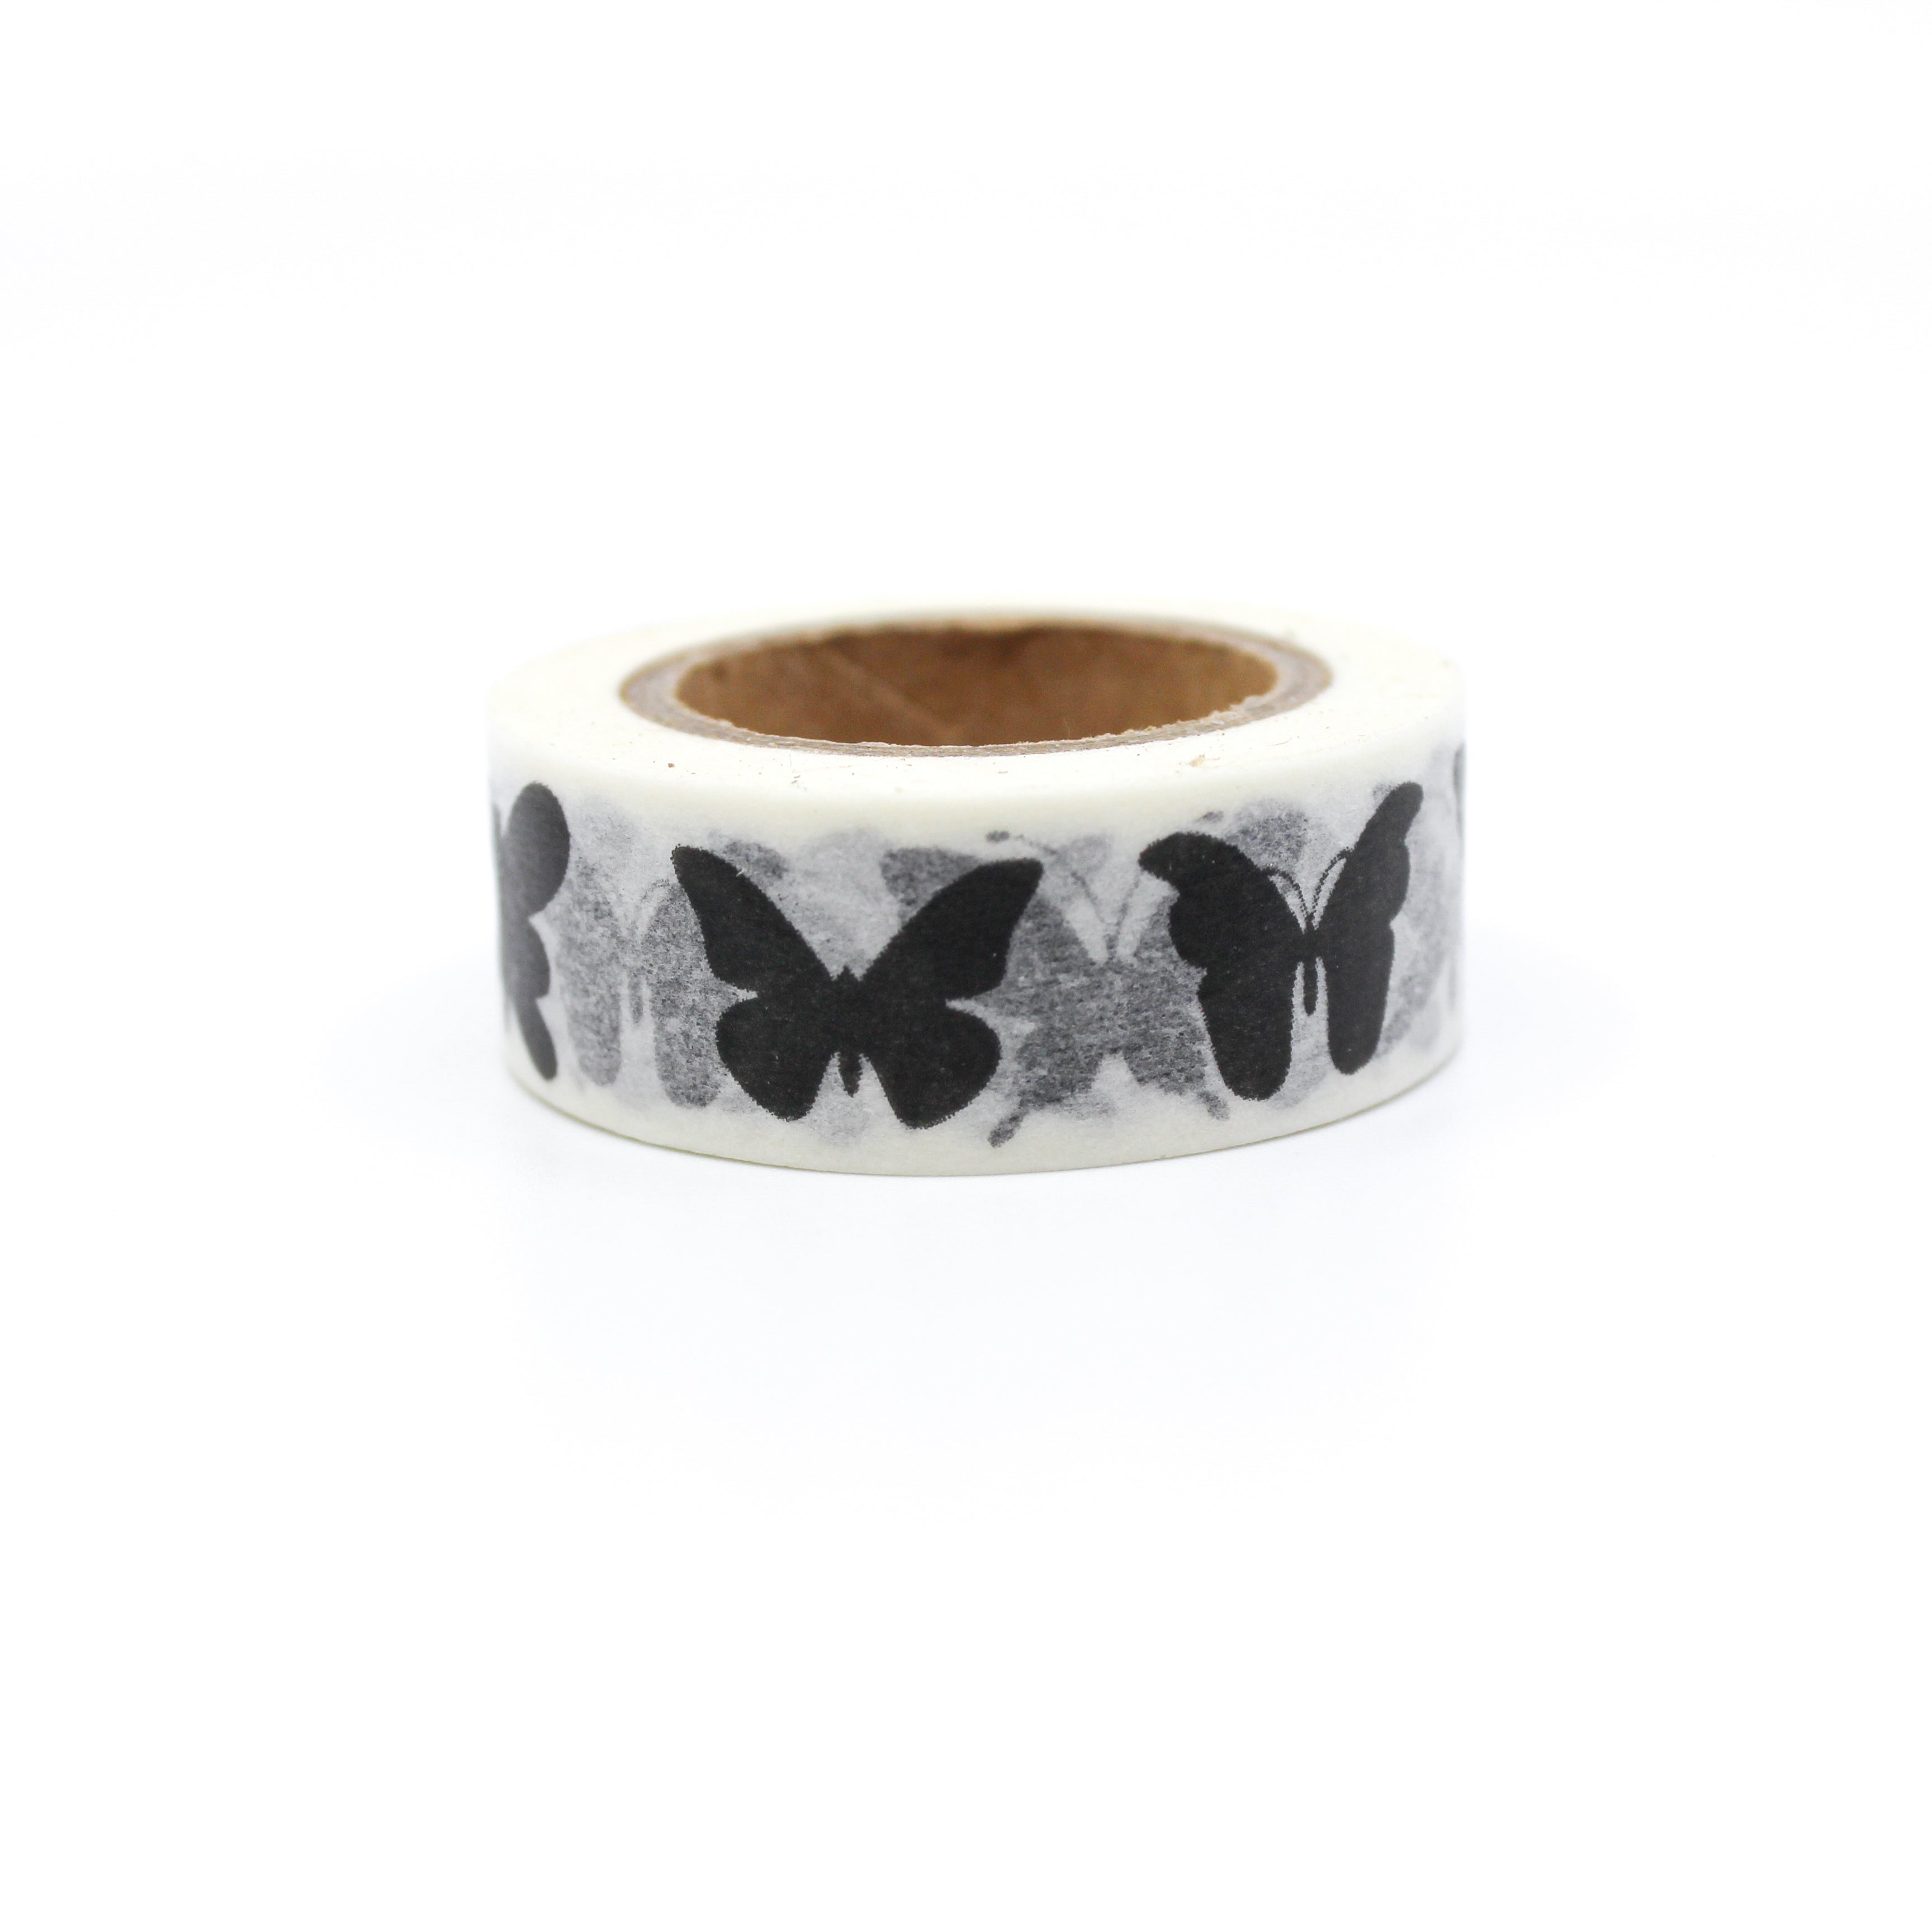 This is a black butterfly in a white background washi tape from BBB Supplies Craft Shop